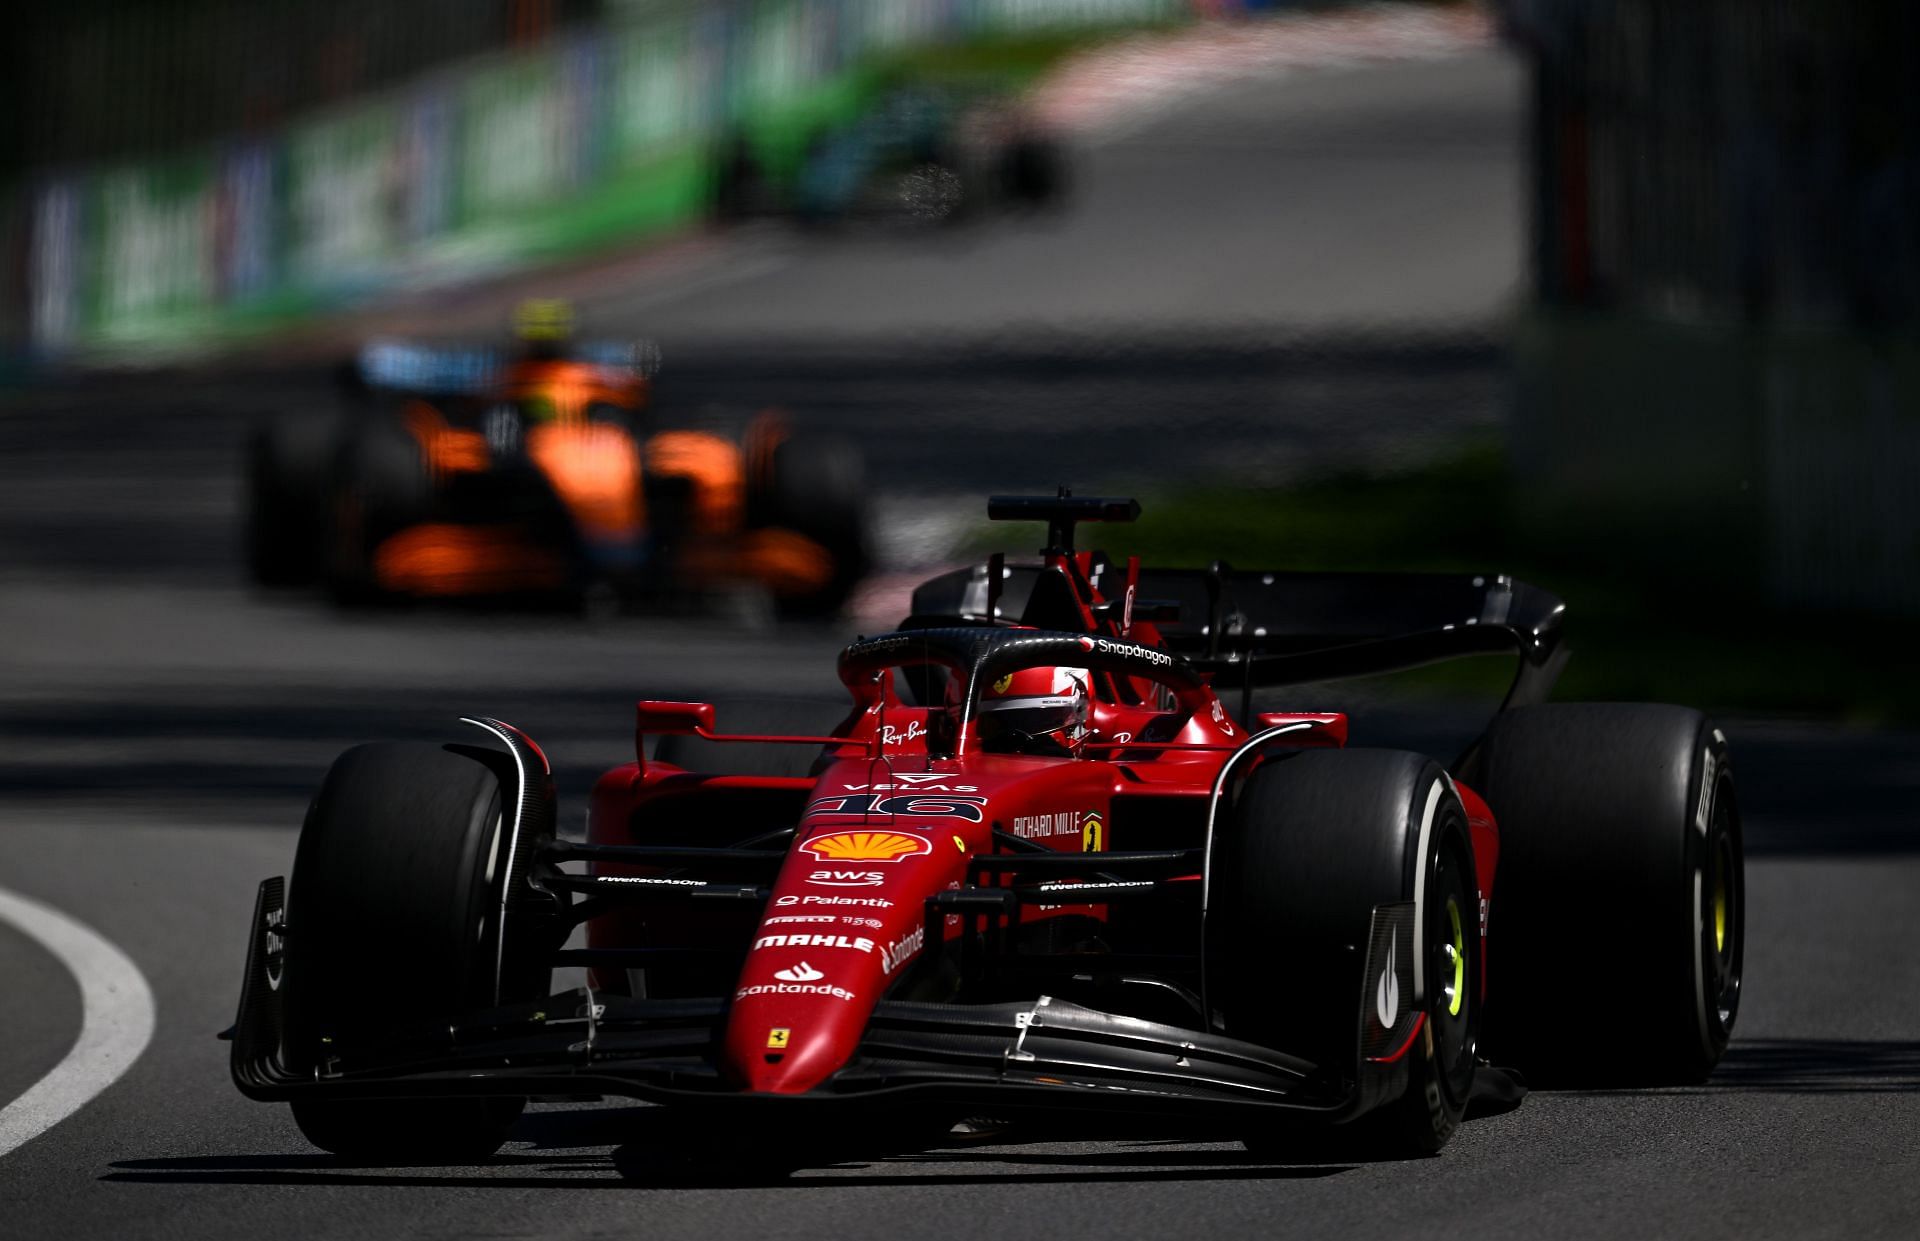 Ferrari driver Charles Leclerc in action during the 2022 F1 Canadian GP. (Photo by Clive Mason/Getty Images)